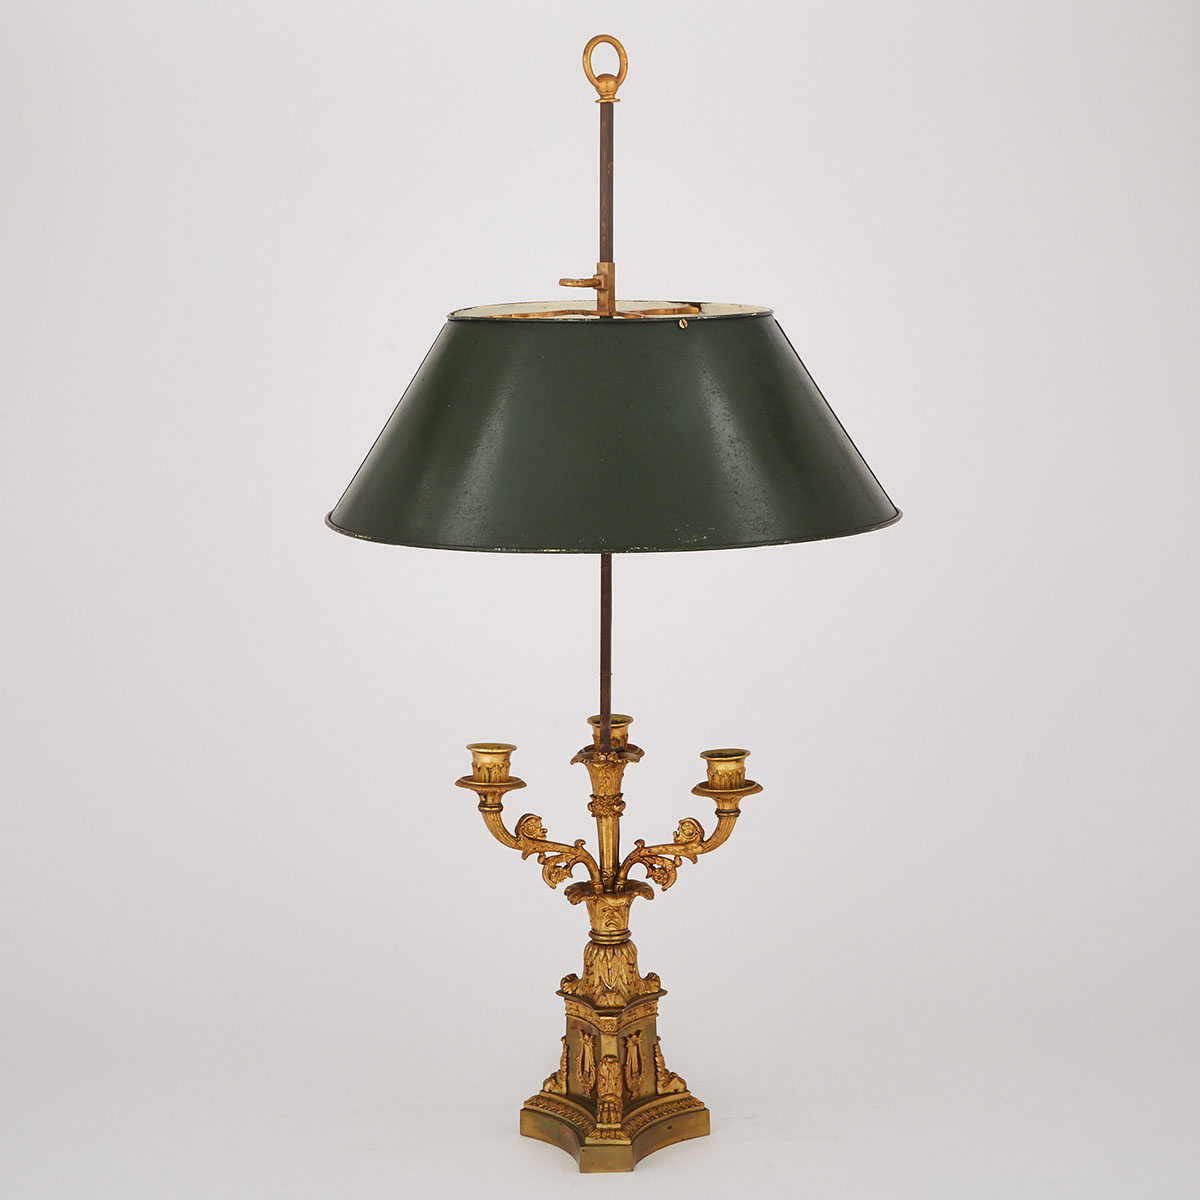 French Empire Style Gilt Bronze Bouillotte Desk Lamp, early 20th century